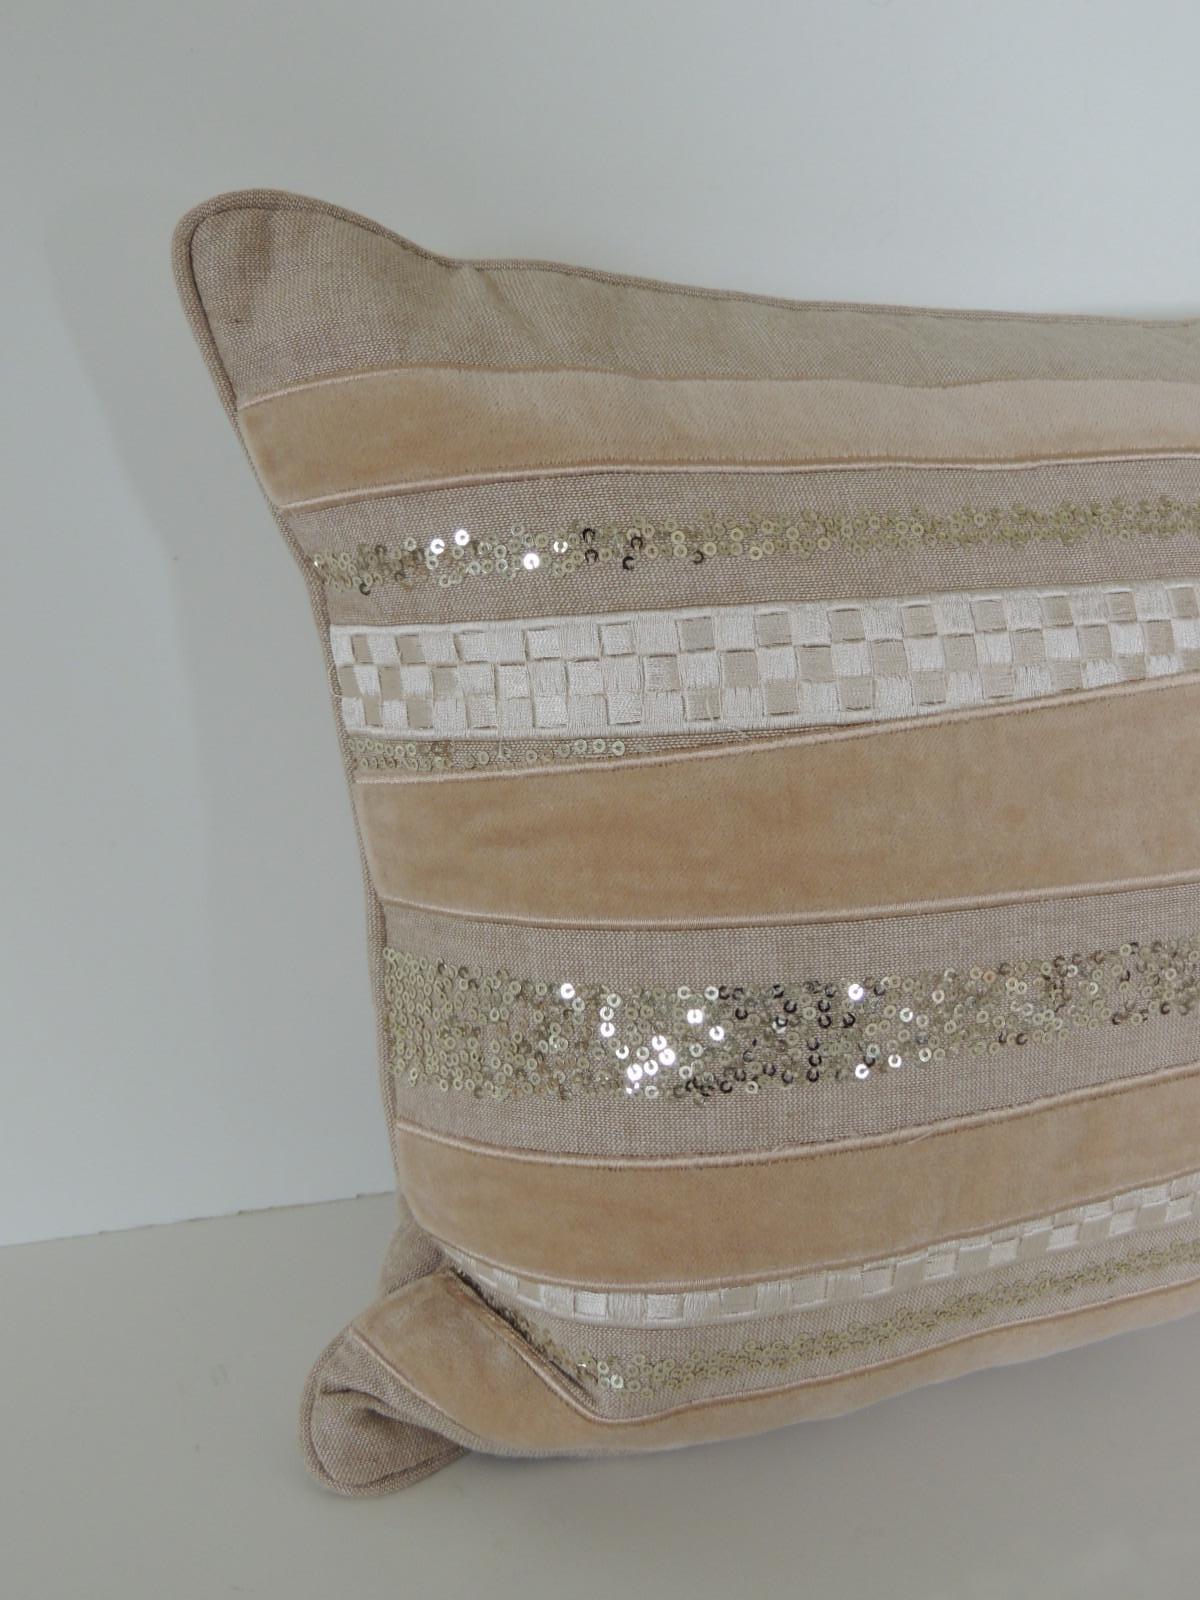 Tan and gold long bolster decorative pillow by Celerie Kemble.
Celerie linen pillow with woven applique ribbon design and small embroidered
sequins. Double-sided. Zipper closure, feather/down insert.
Size: 13